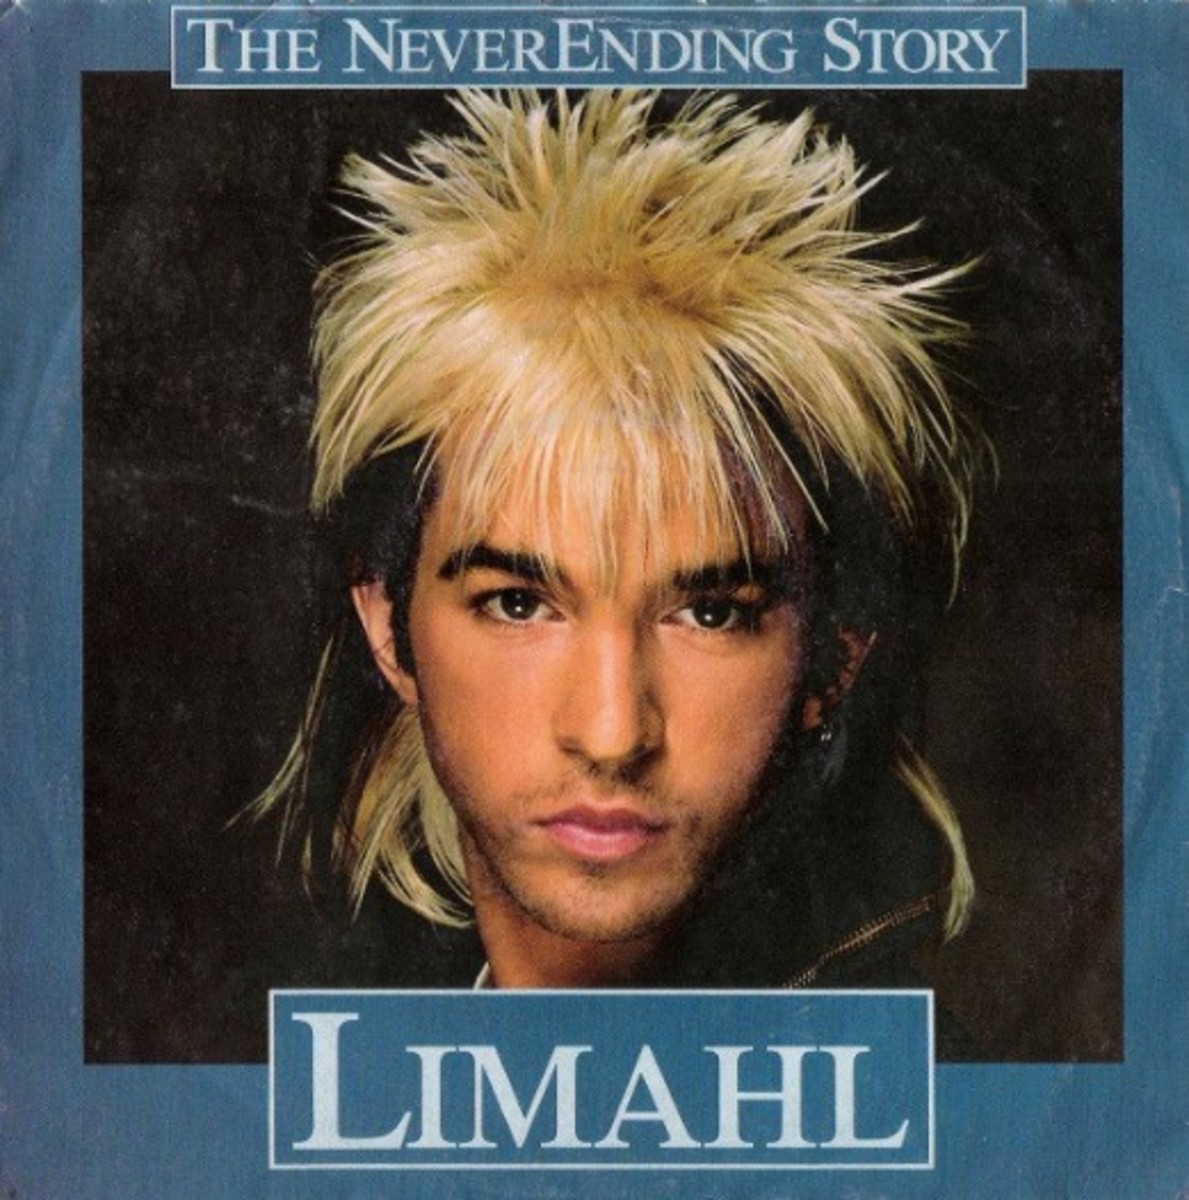 Limahl 45 picture sleeve